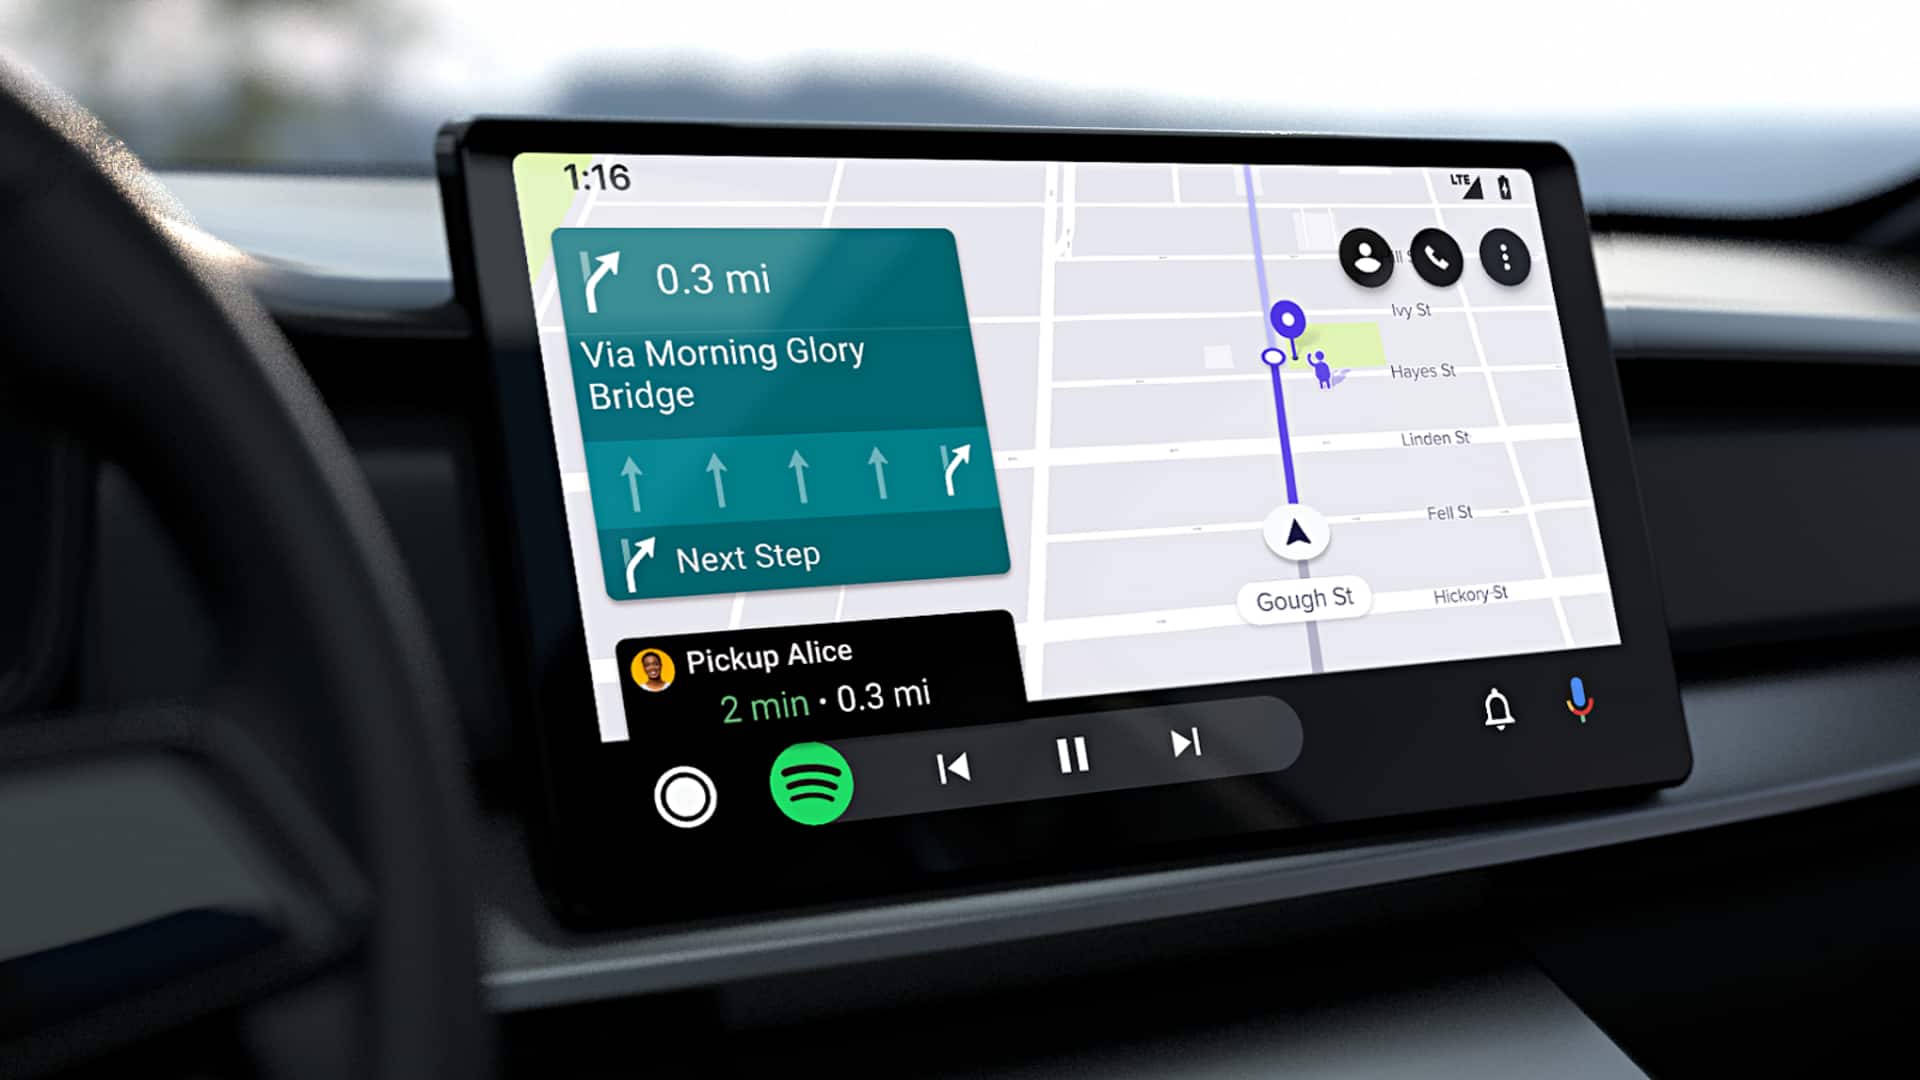 Google Maps on Android Auto widely rolling out 3D buildings